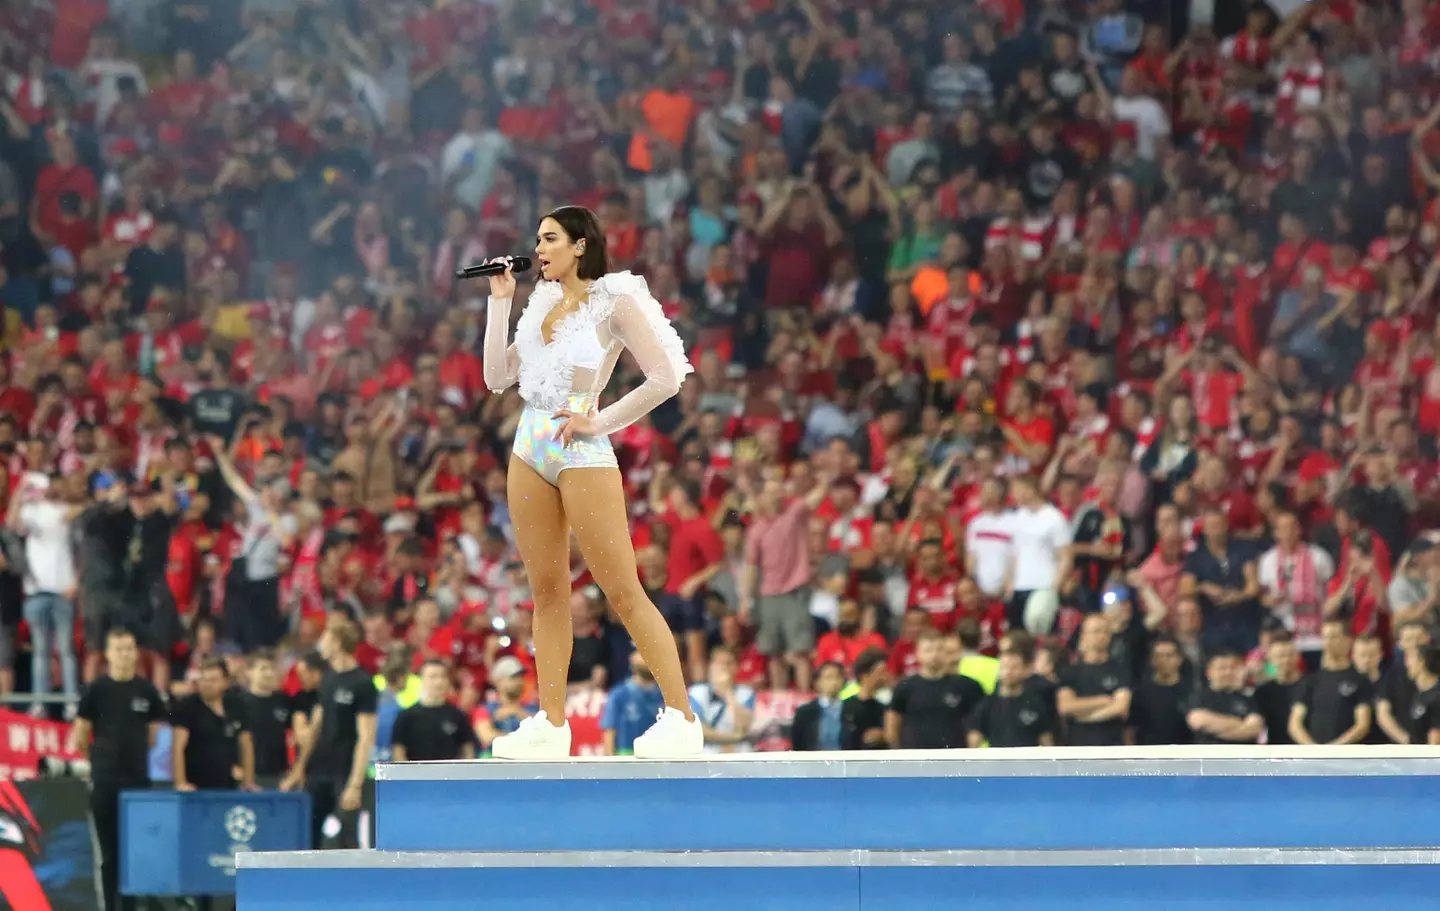 Dua Lipa playing the Champions League final opening ceremony in 2018. Image: PA Images